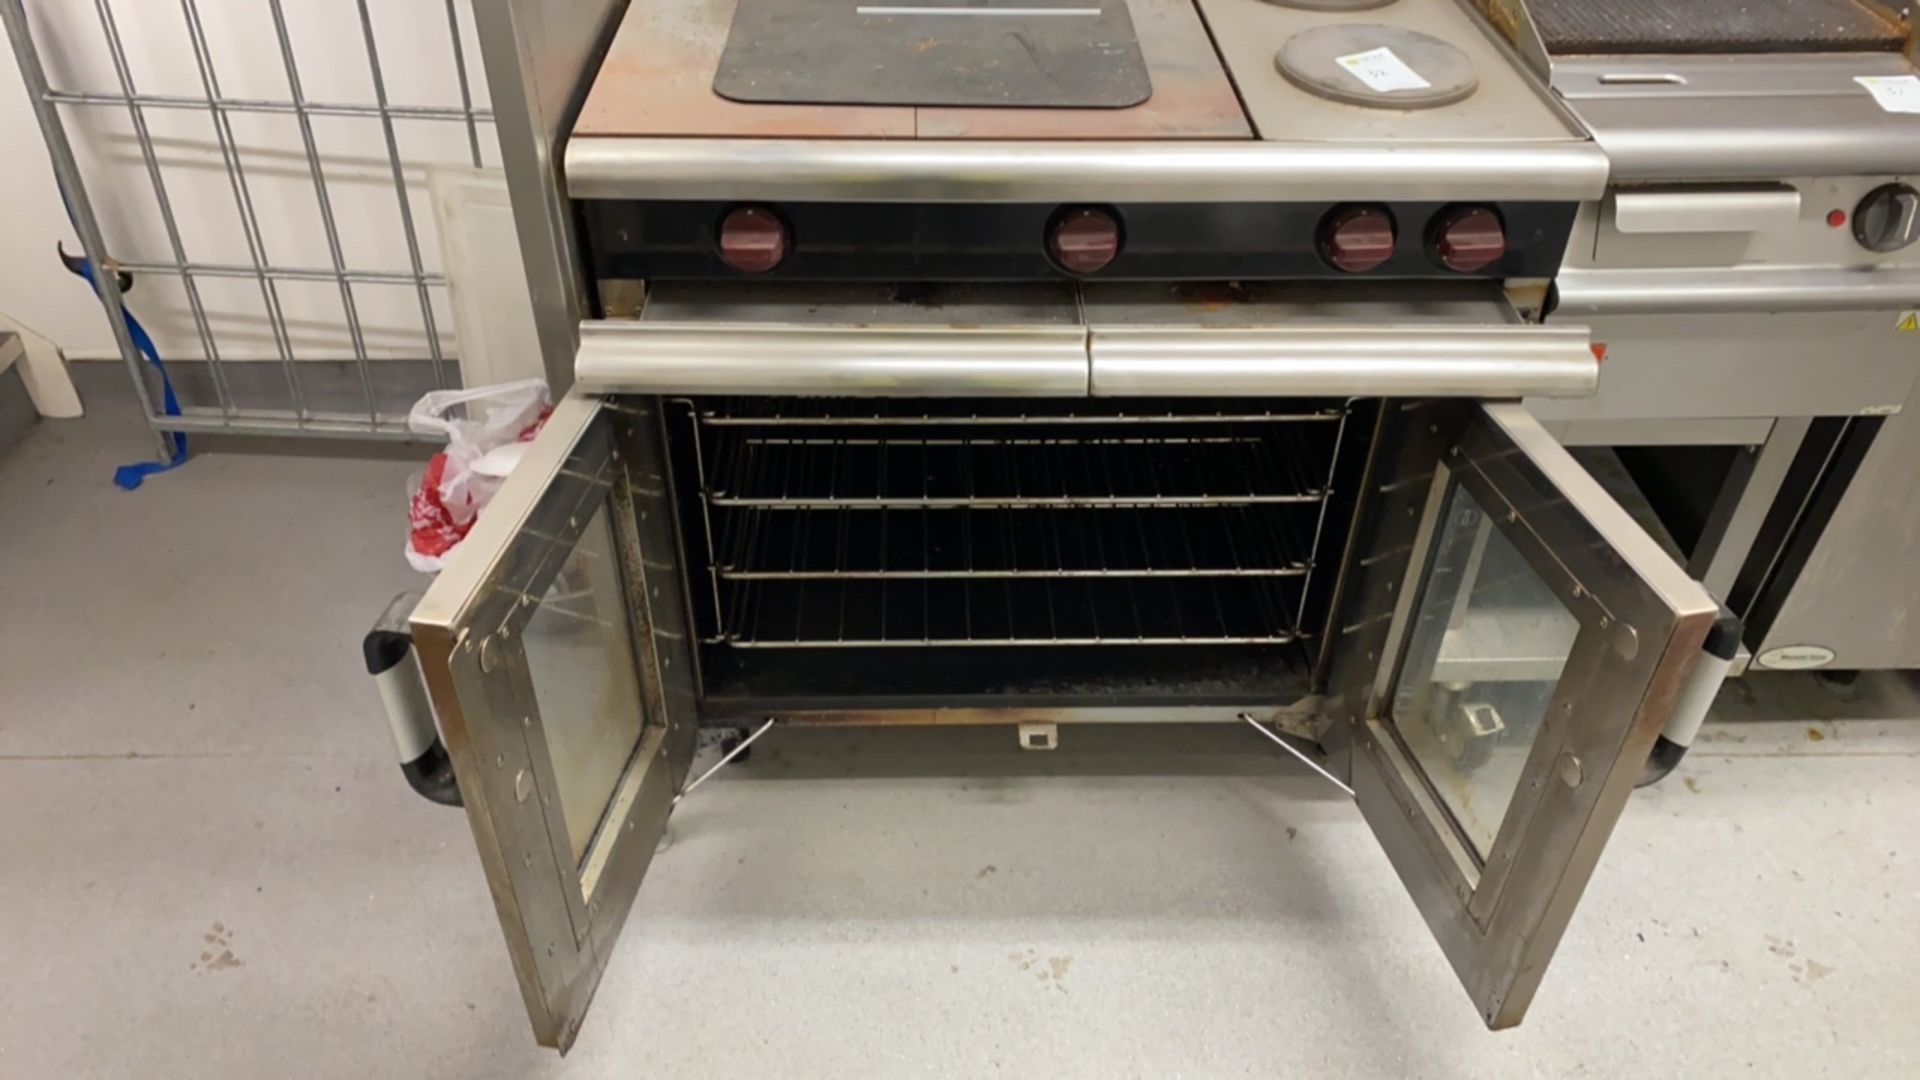 Moorwood Vulcan oven with hot plate - Image 5 of 6